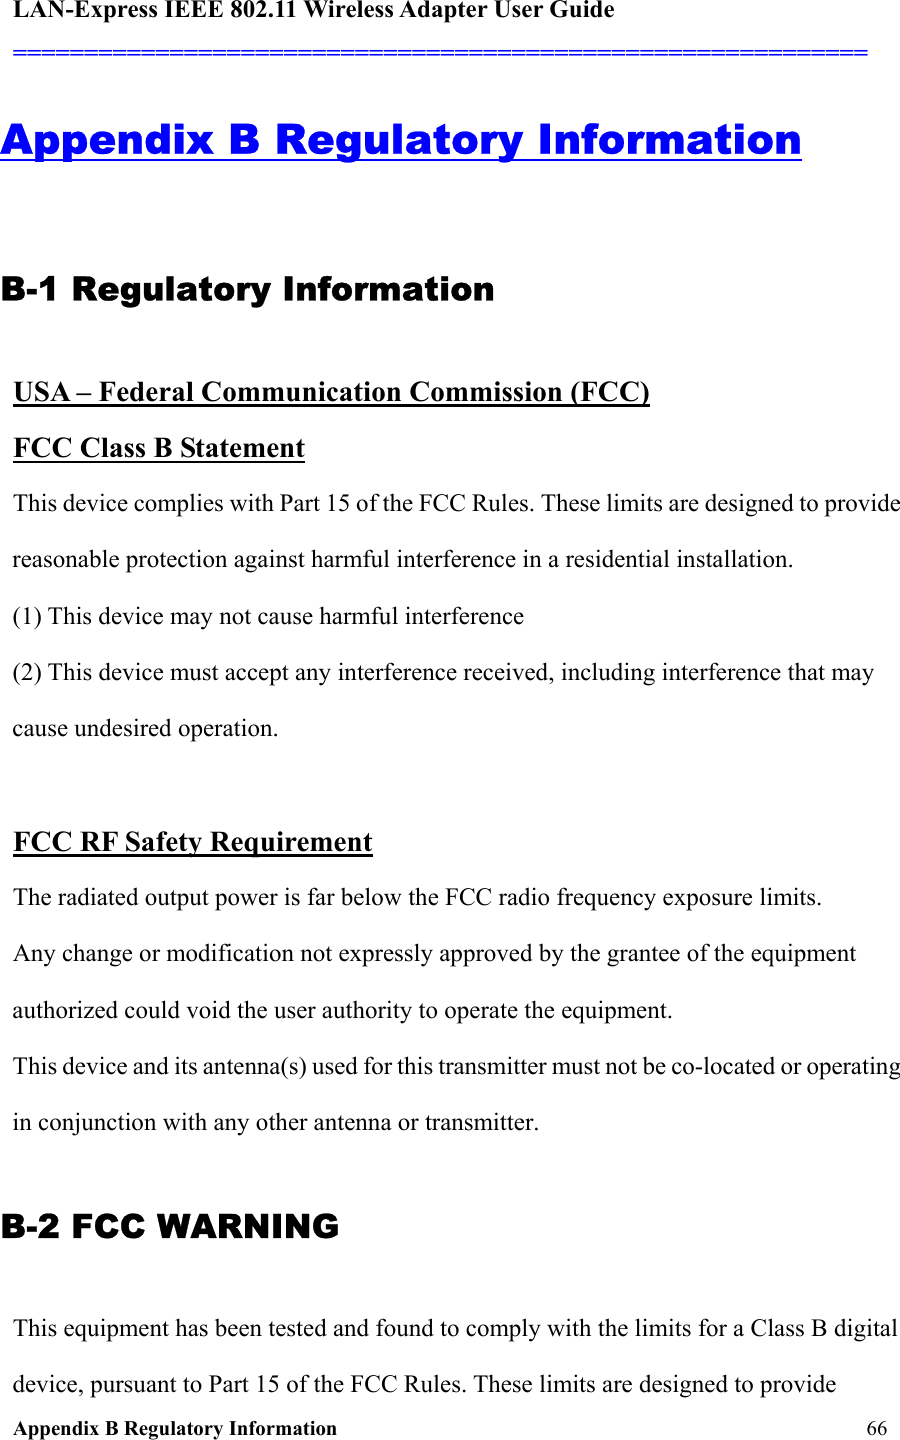 LAN-Express IEEE 802.11 Wireless Adapter User Guide ============================================================  Appendix B Regulatory Information     66 Appendix B Regulatory Information B-1 Regulatory Information USA – Federal Communication Commission (FCC) FCC Class B Statement  This device complies with Part 15 of the FCC Rules. These limits are designed to provide reasonable protection against harmful interference in a residential installation. (1) This device may not cause harmful interference  (2) This device must accept any interference received, including interference that may cause undesired operation.  FCC RF Safety Requirement   The radiated output power is far below the FCC radio frequency exposure limits.  Any change or modification not expressly approved by the grantee of the equipment authorized could void the user authority to operate the equipment. This device and its antenna(s) used for this transmitter must not be co-located or operating in conjunction with any other antenna or transmitter. B-2 FCC WARNING This equipment has been tested and found to comply with the limits for a Class B digital device, pursuant to Part 15 of the FCC Rules. These limits are designed to provide 